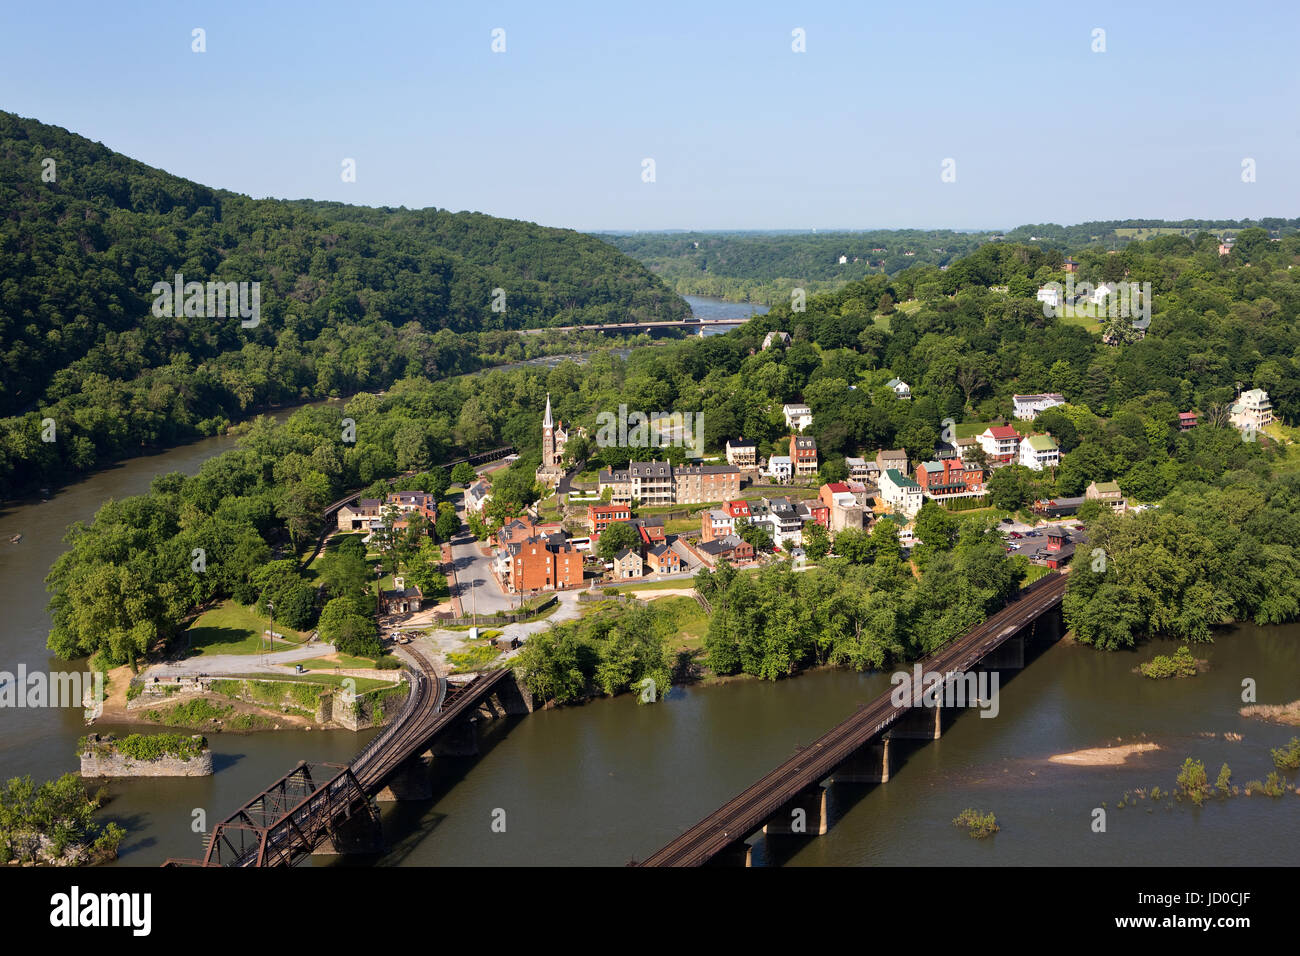 Aerial view of the town of Harpers Ferry, West Virginia, which includes Harpers Ferry National Historical Park, located between the Potomac River and  Stock Photo